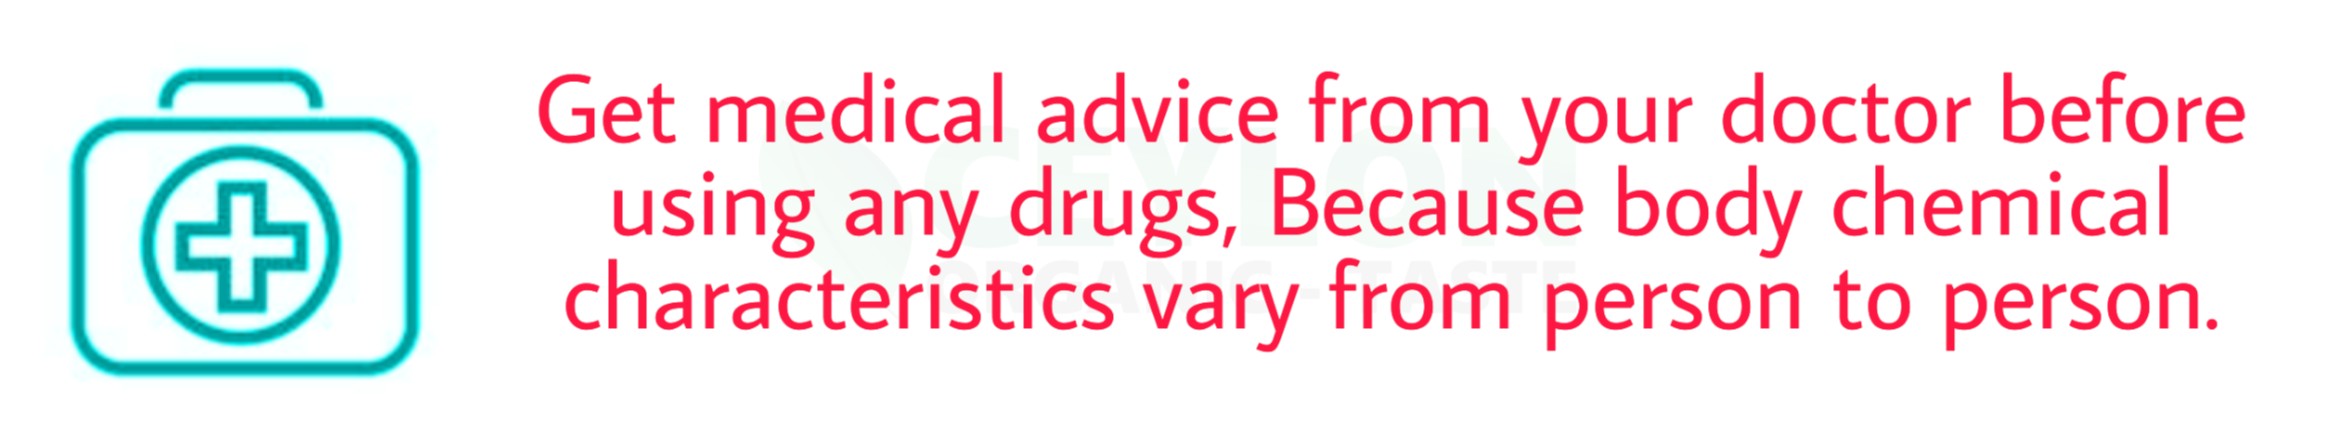 Get medical advice from your doctor before using any drugs